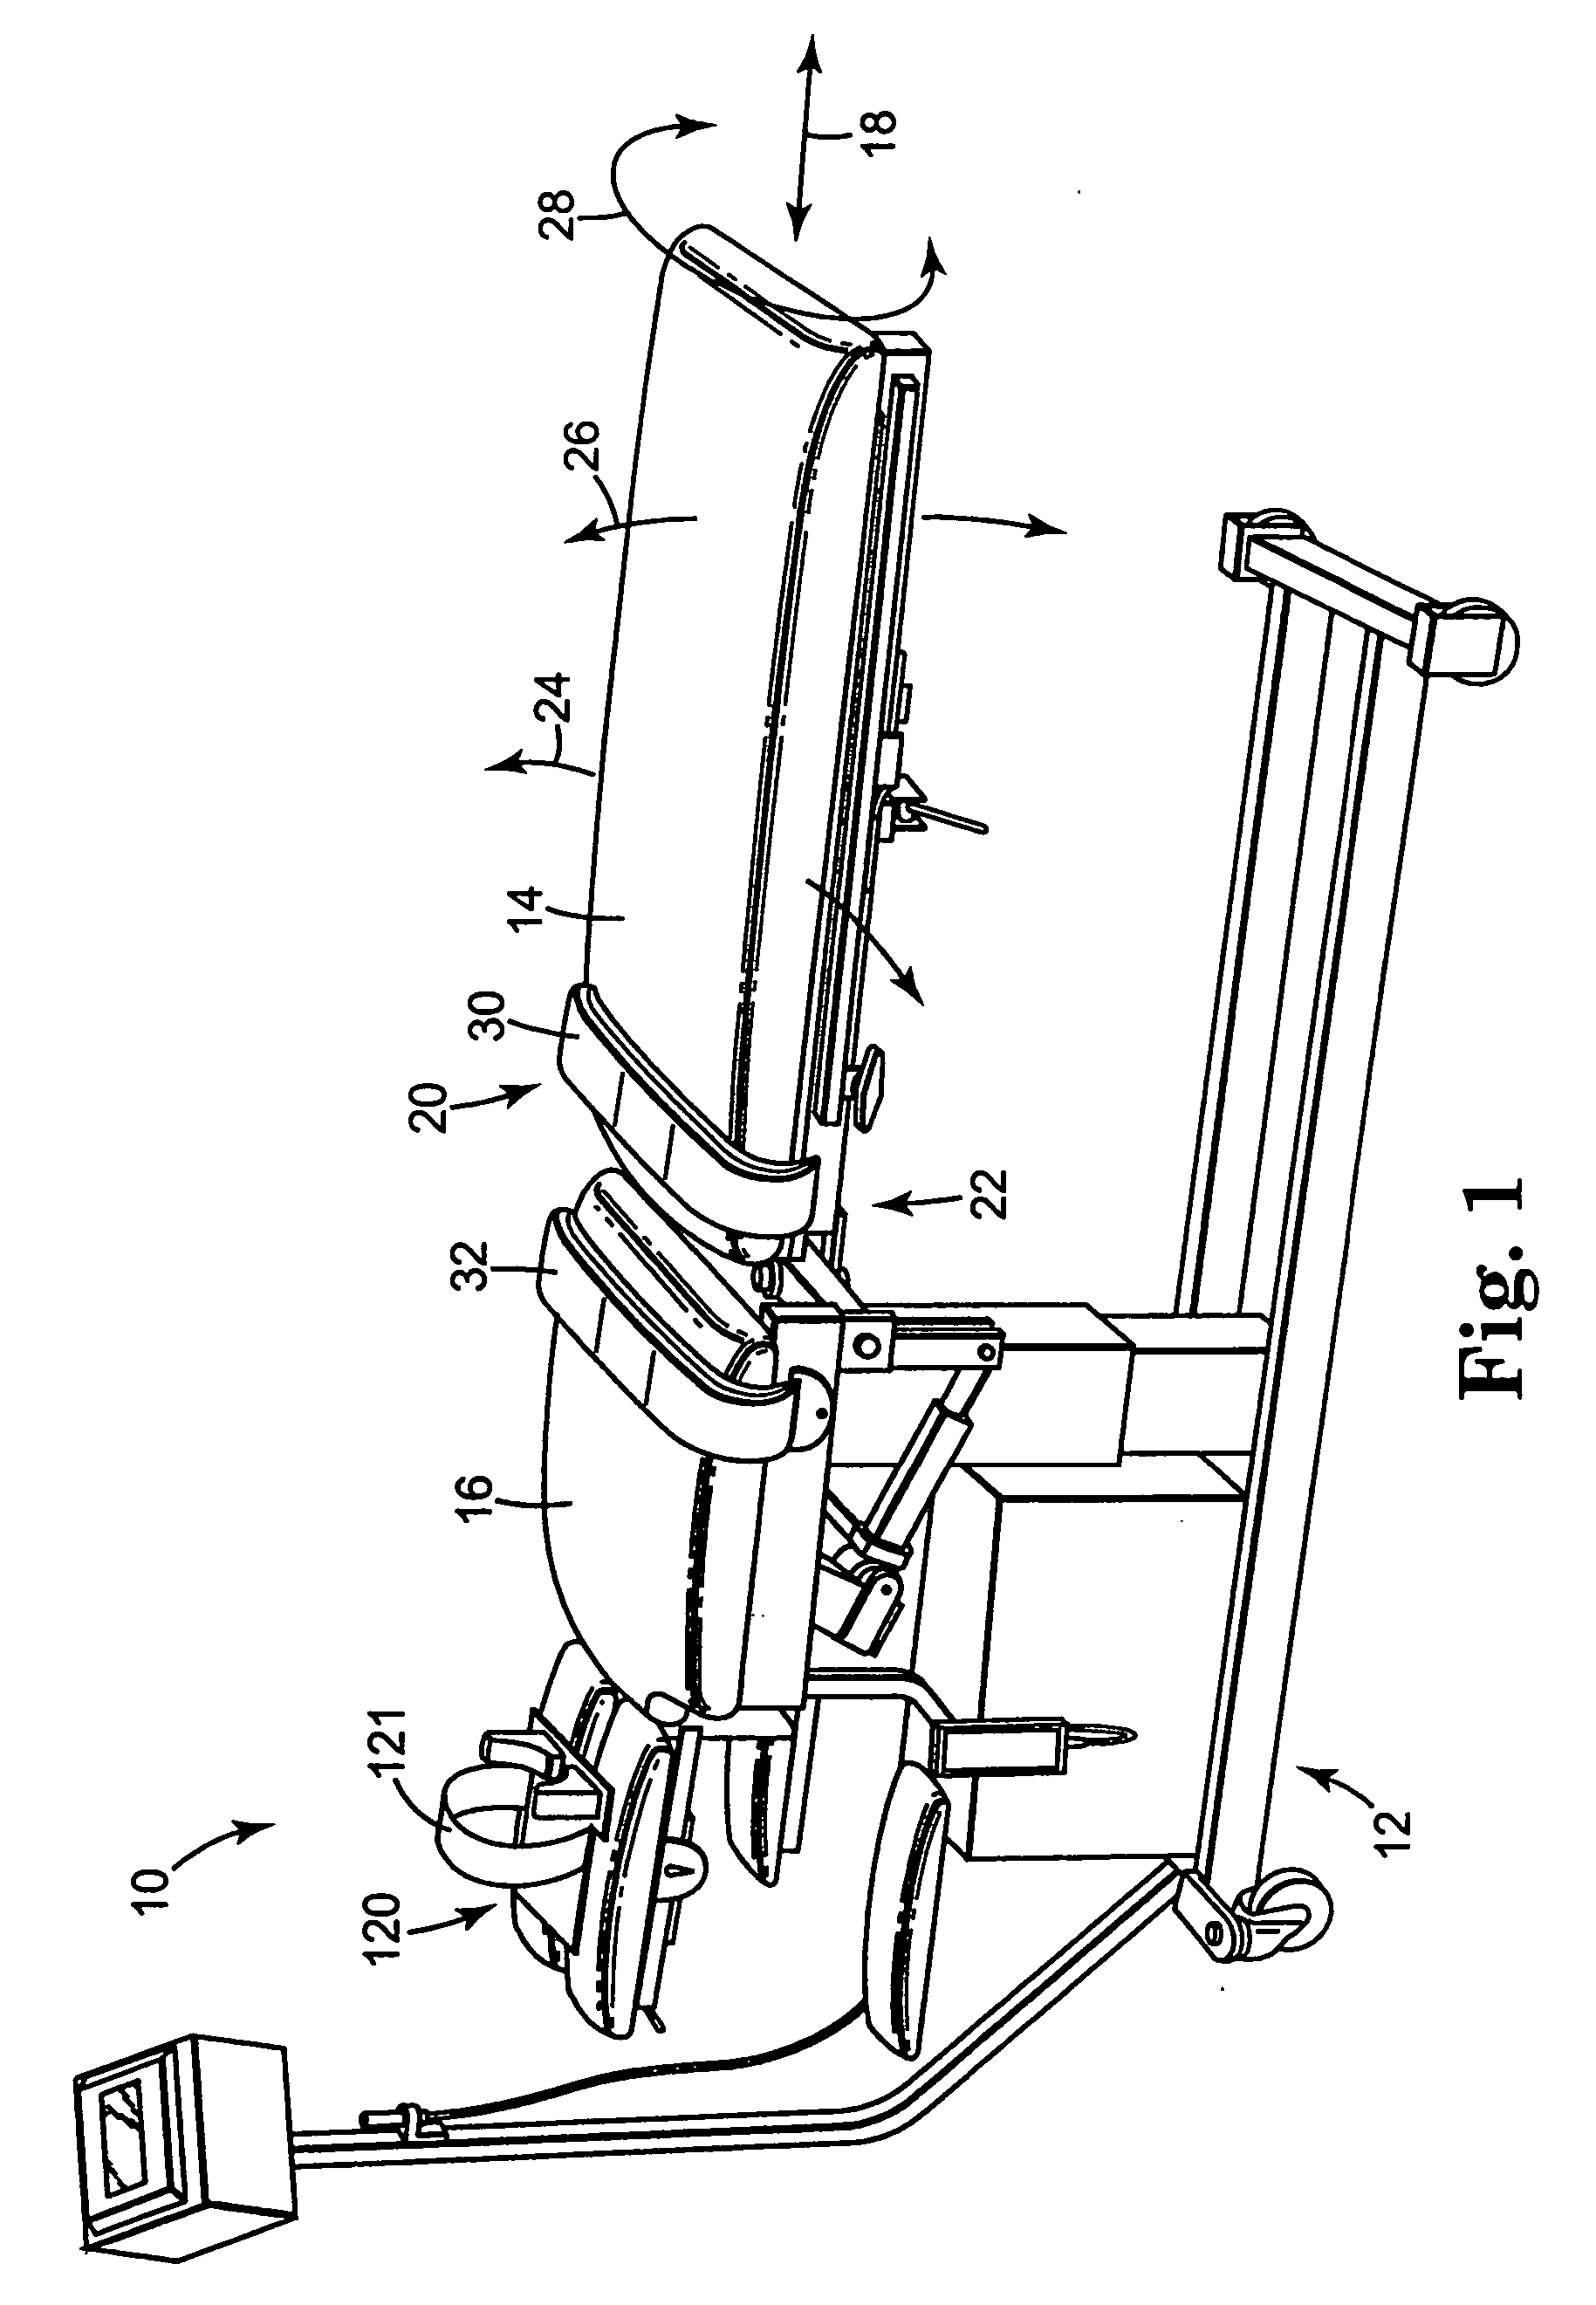 Multi-axis cervical and lumbar traction table